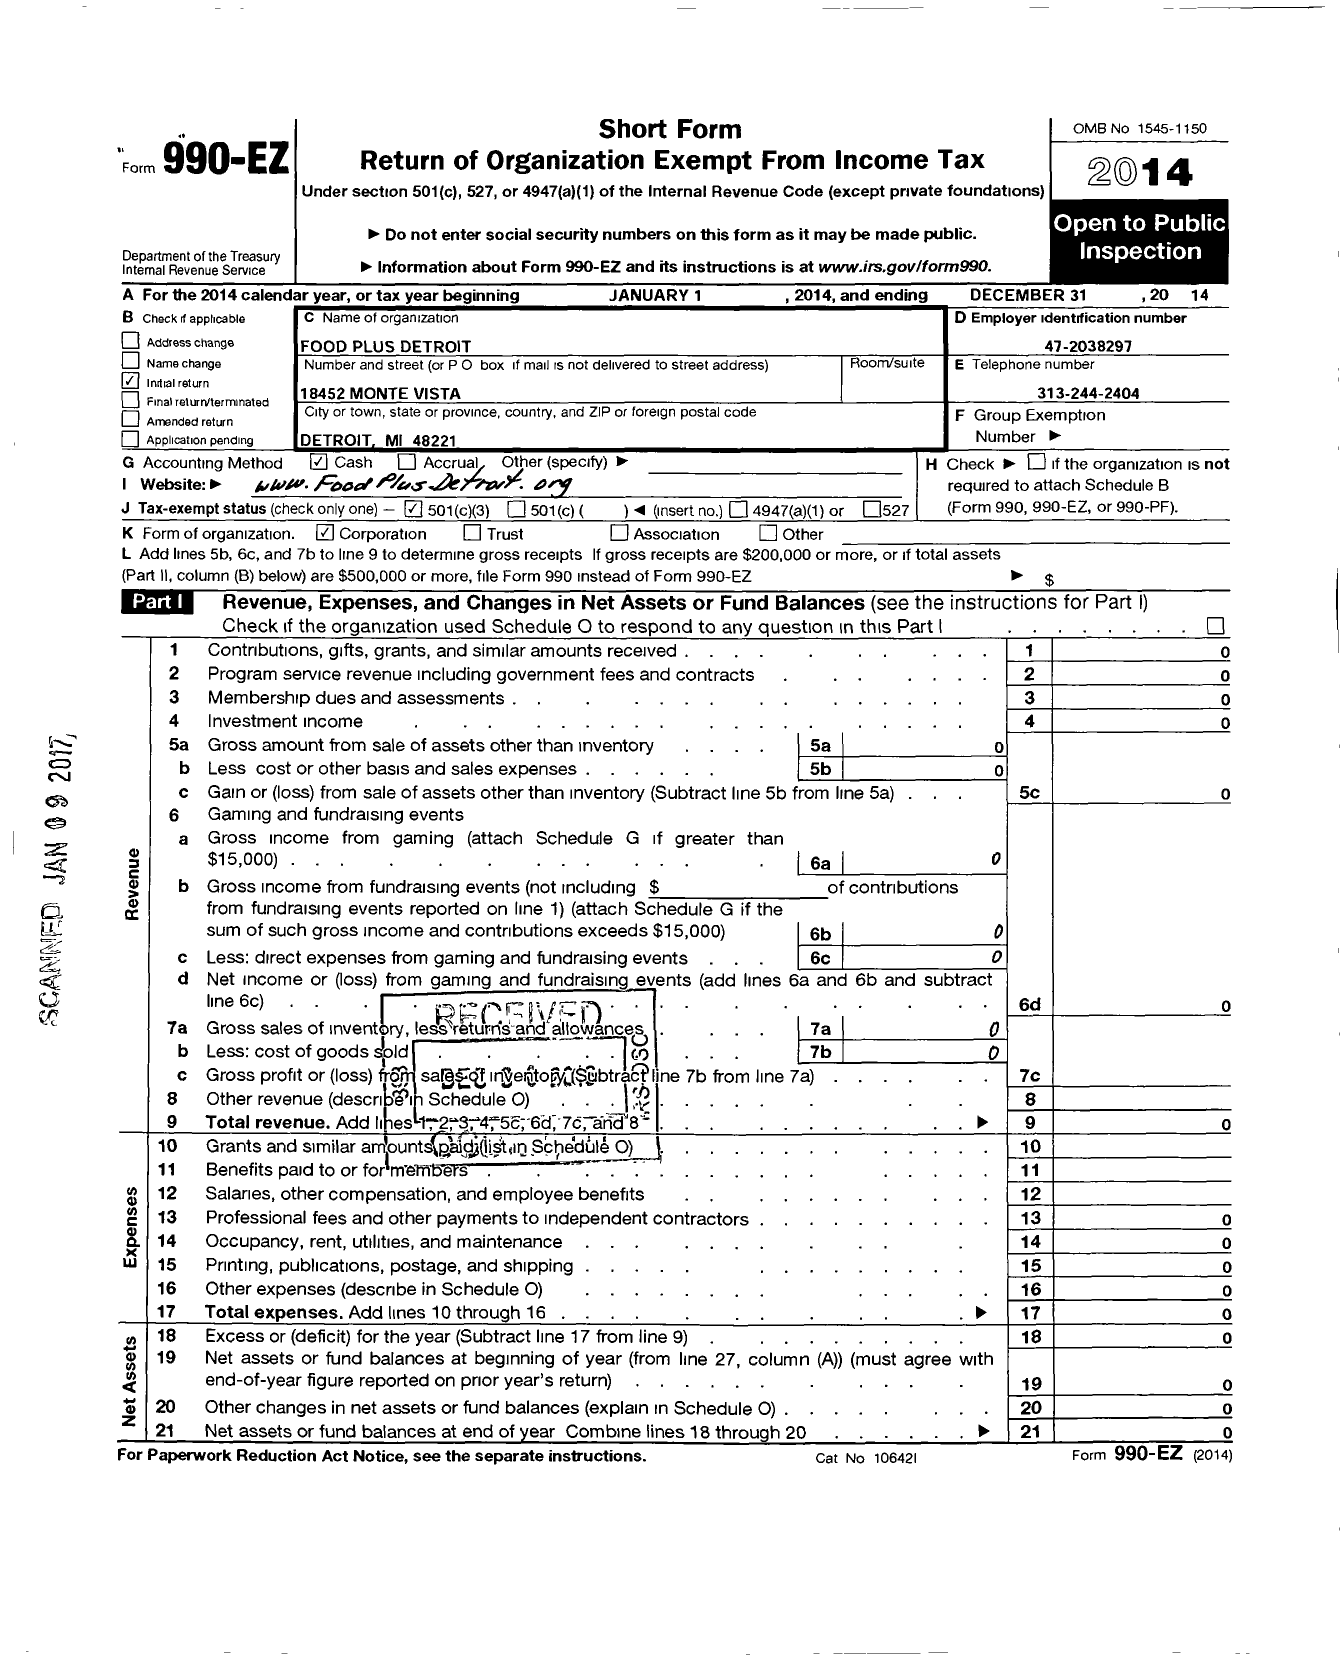 Image of first page of 2014 Form 990EZ for Foodplus Detroit